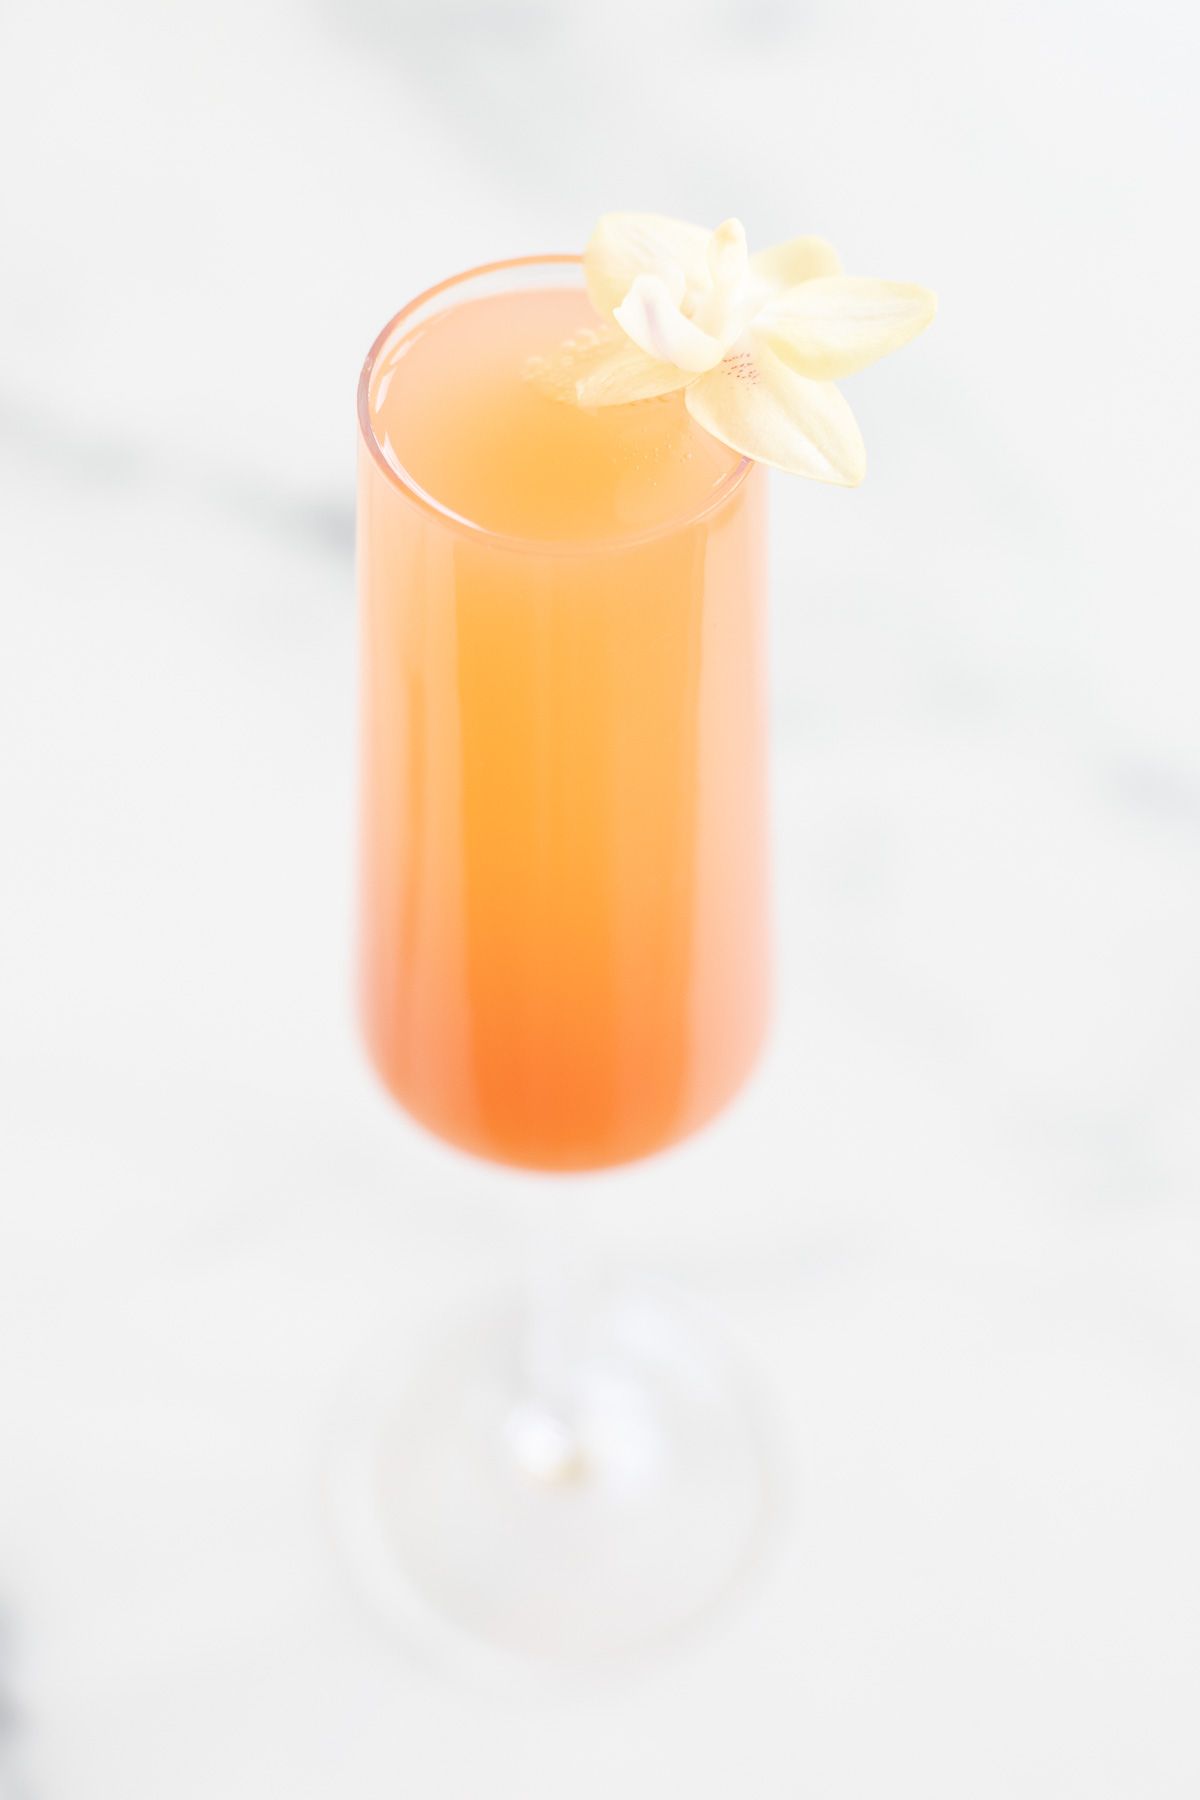 Grapefruit juice and champagne on a marble surface, garnished with a flower 